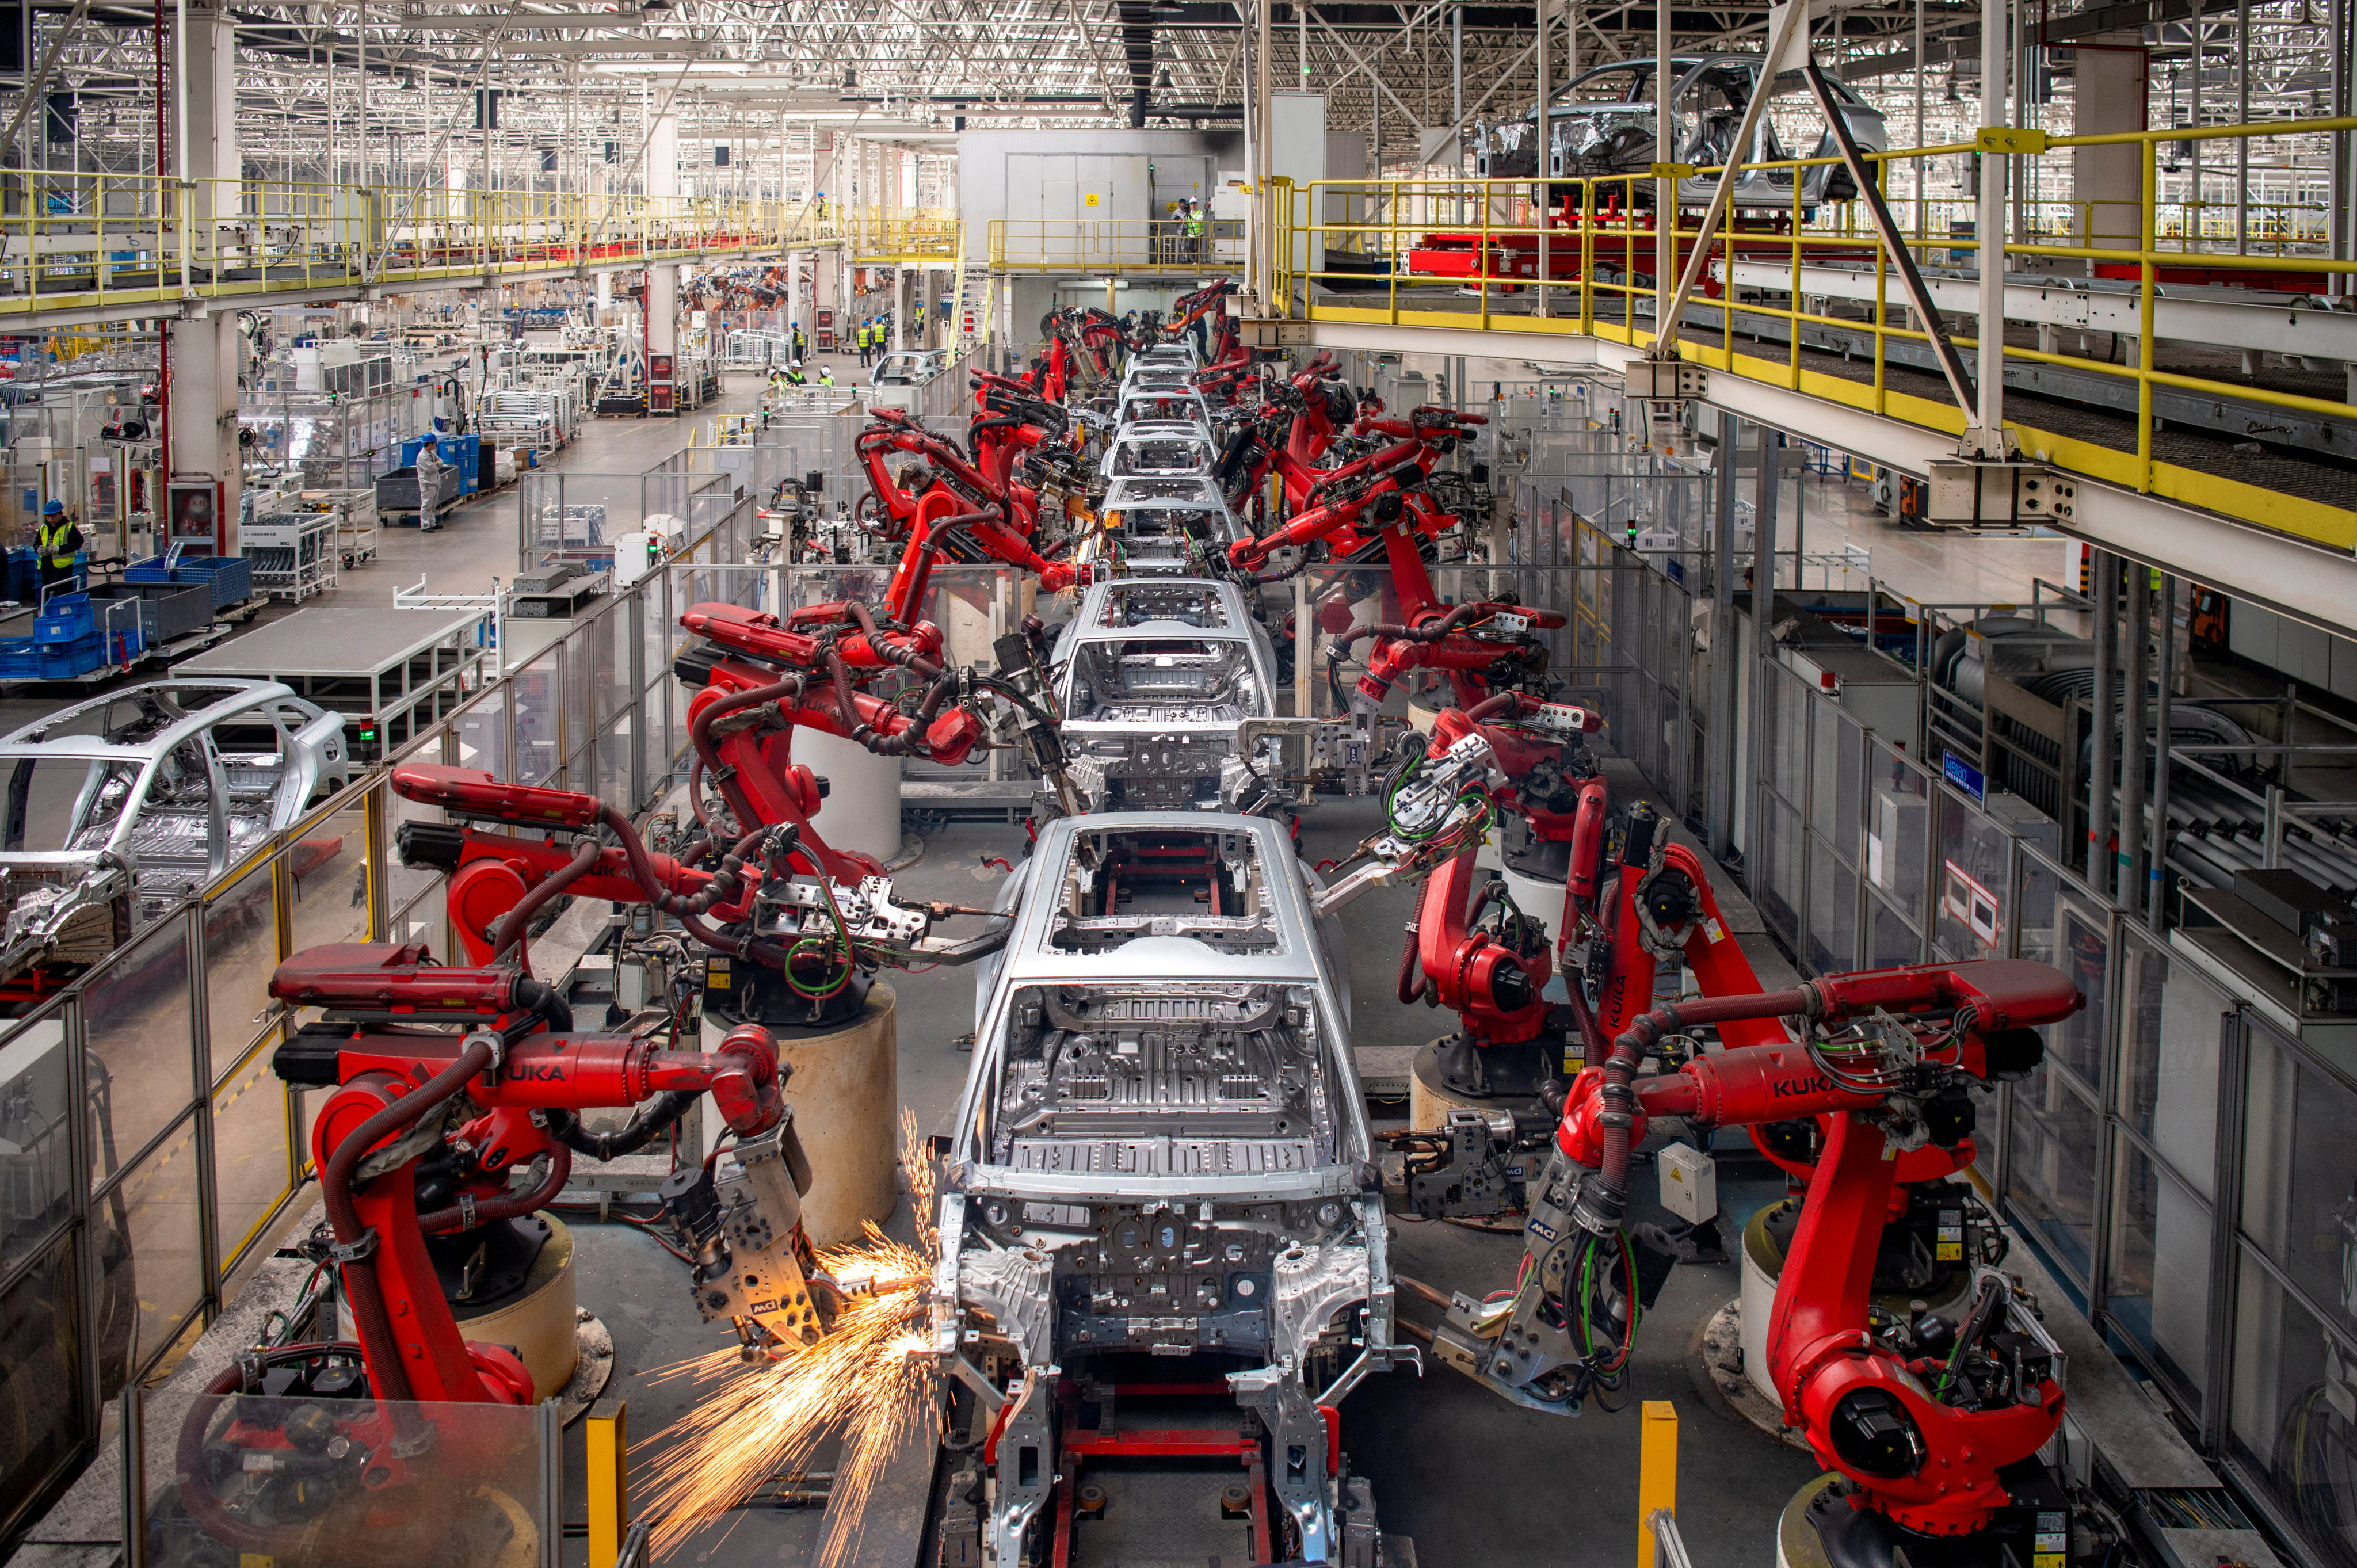 Robotic arms assemble cars on the production line for Leapmotor’s electric vehicles at a factory in Jinhua, Zhejiang province, on April 26. Photo: Reuters